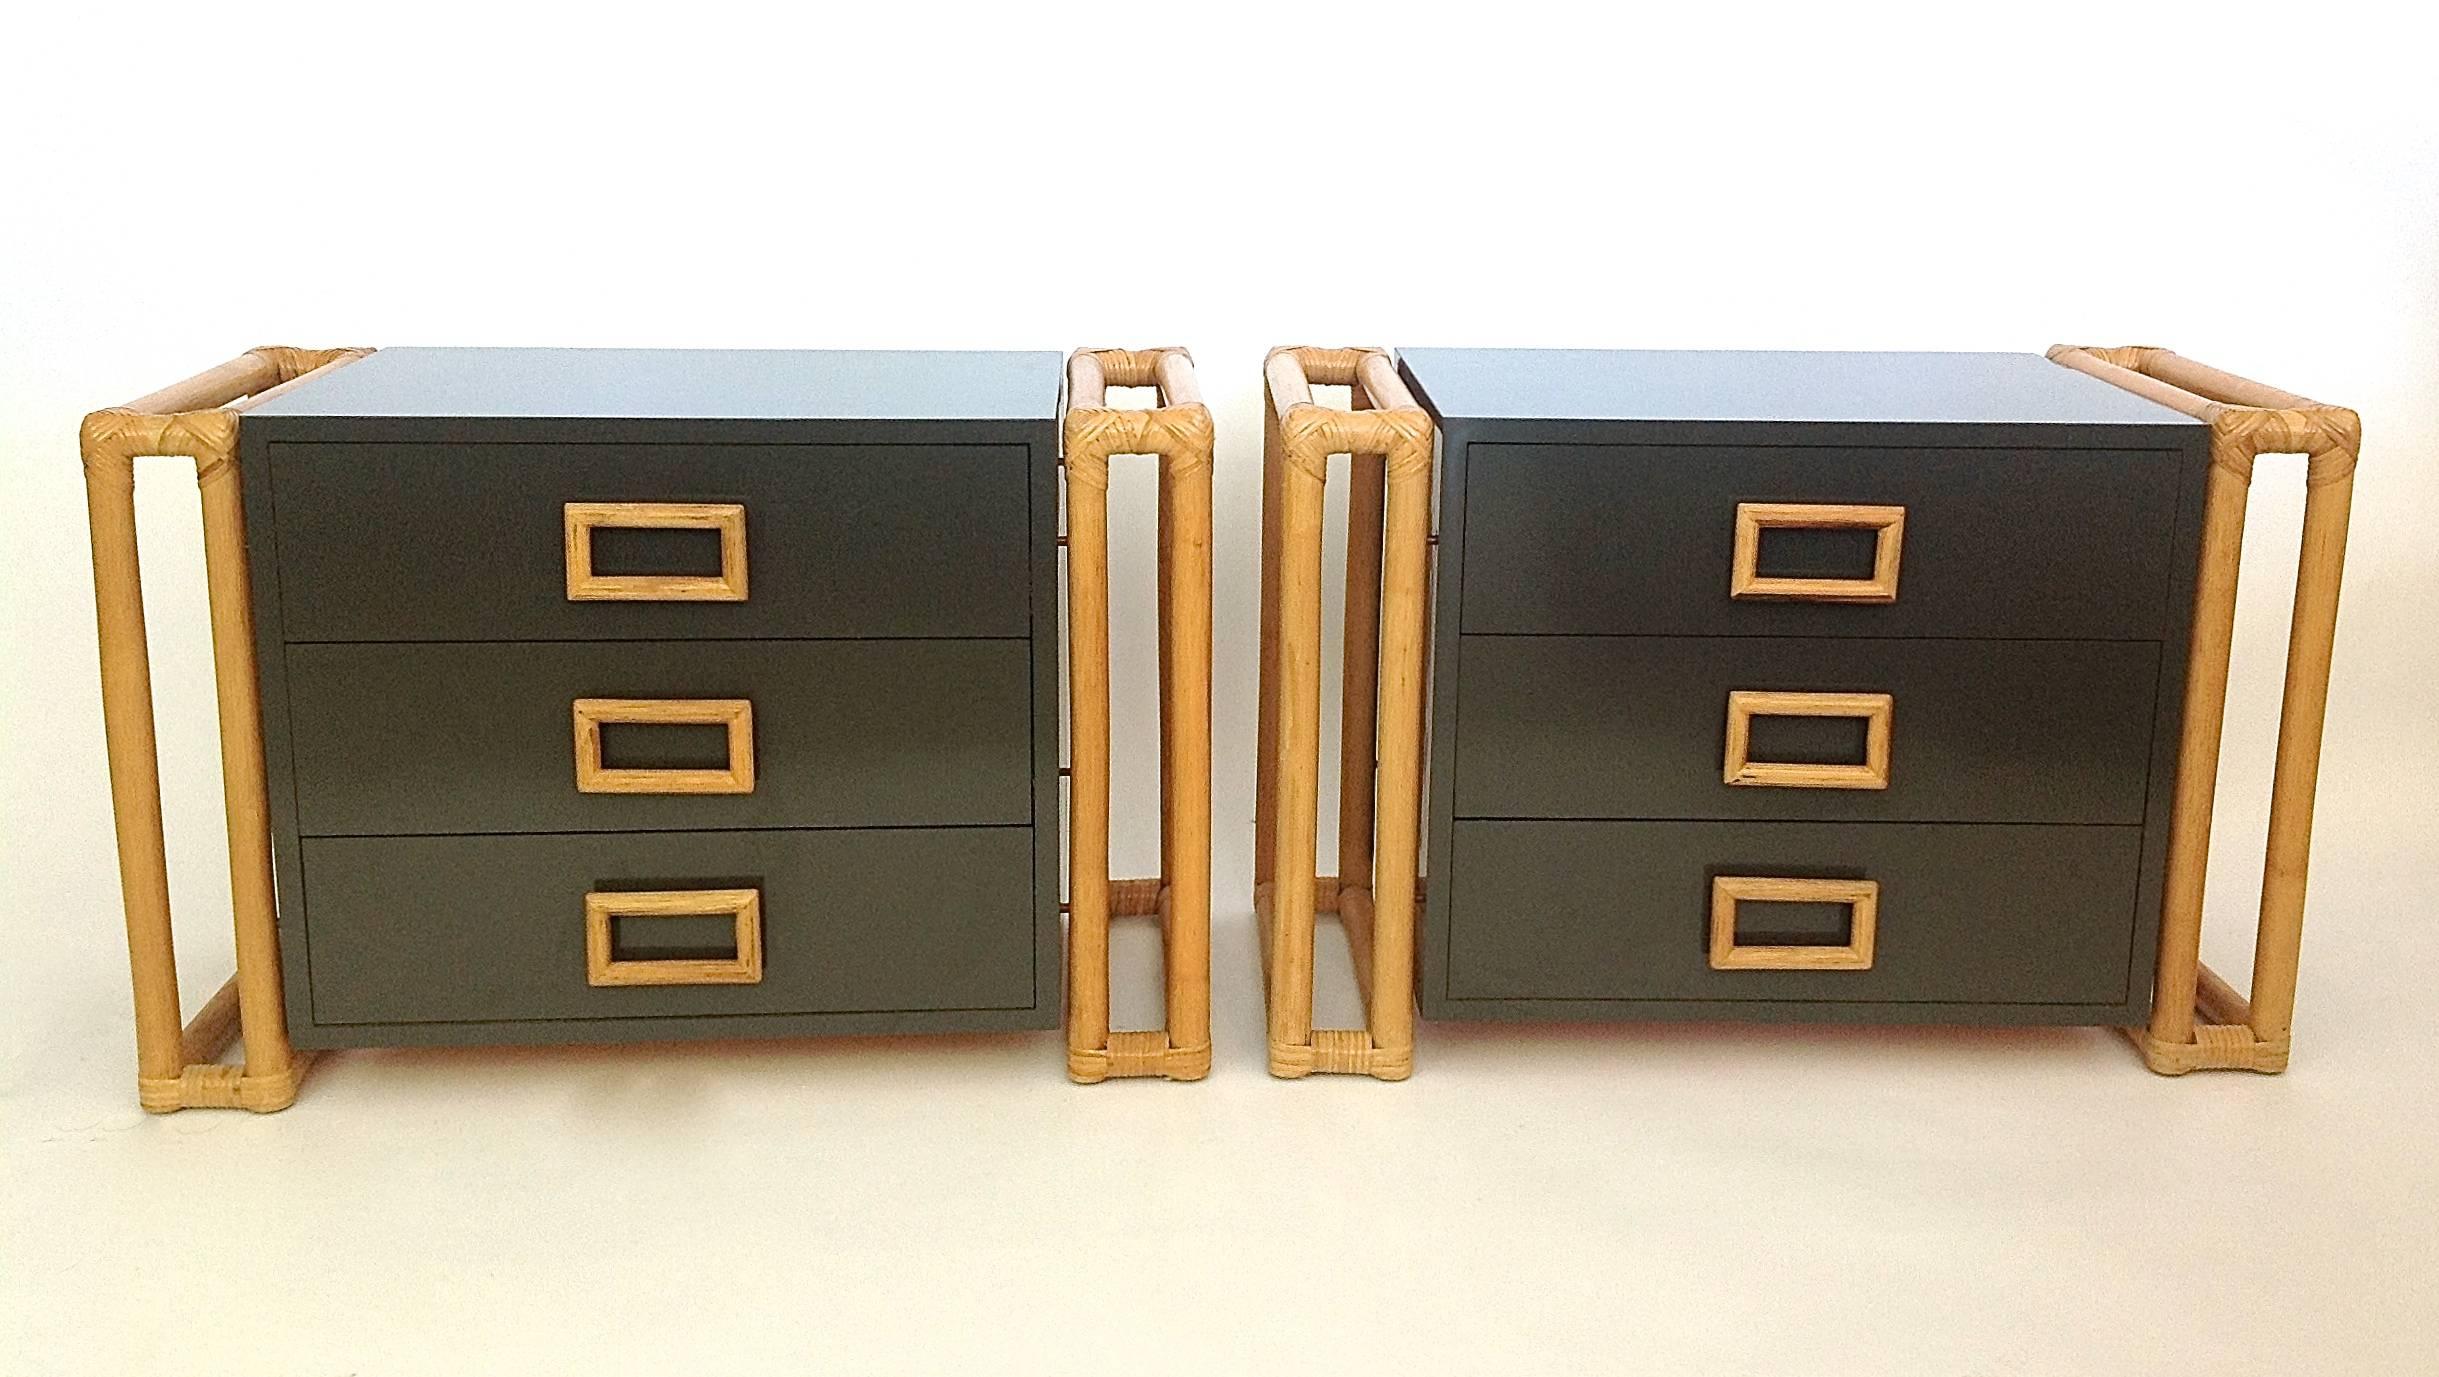 Wonderful pair of grey laminate side tables or chests each with three-drawers with large rattan pulls. The rattan sides add much depth and beauty and the drawers are on gliders. Great for bedside or anywhere a standout piece is needed. 